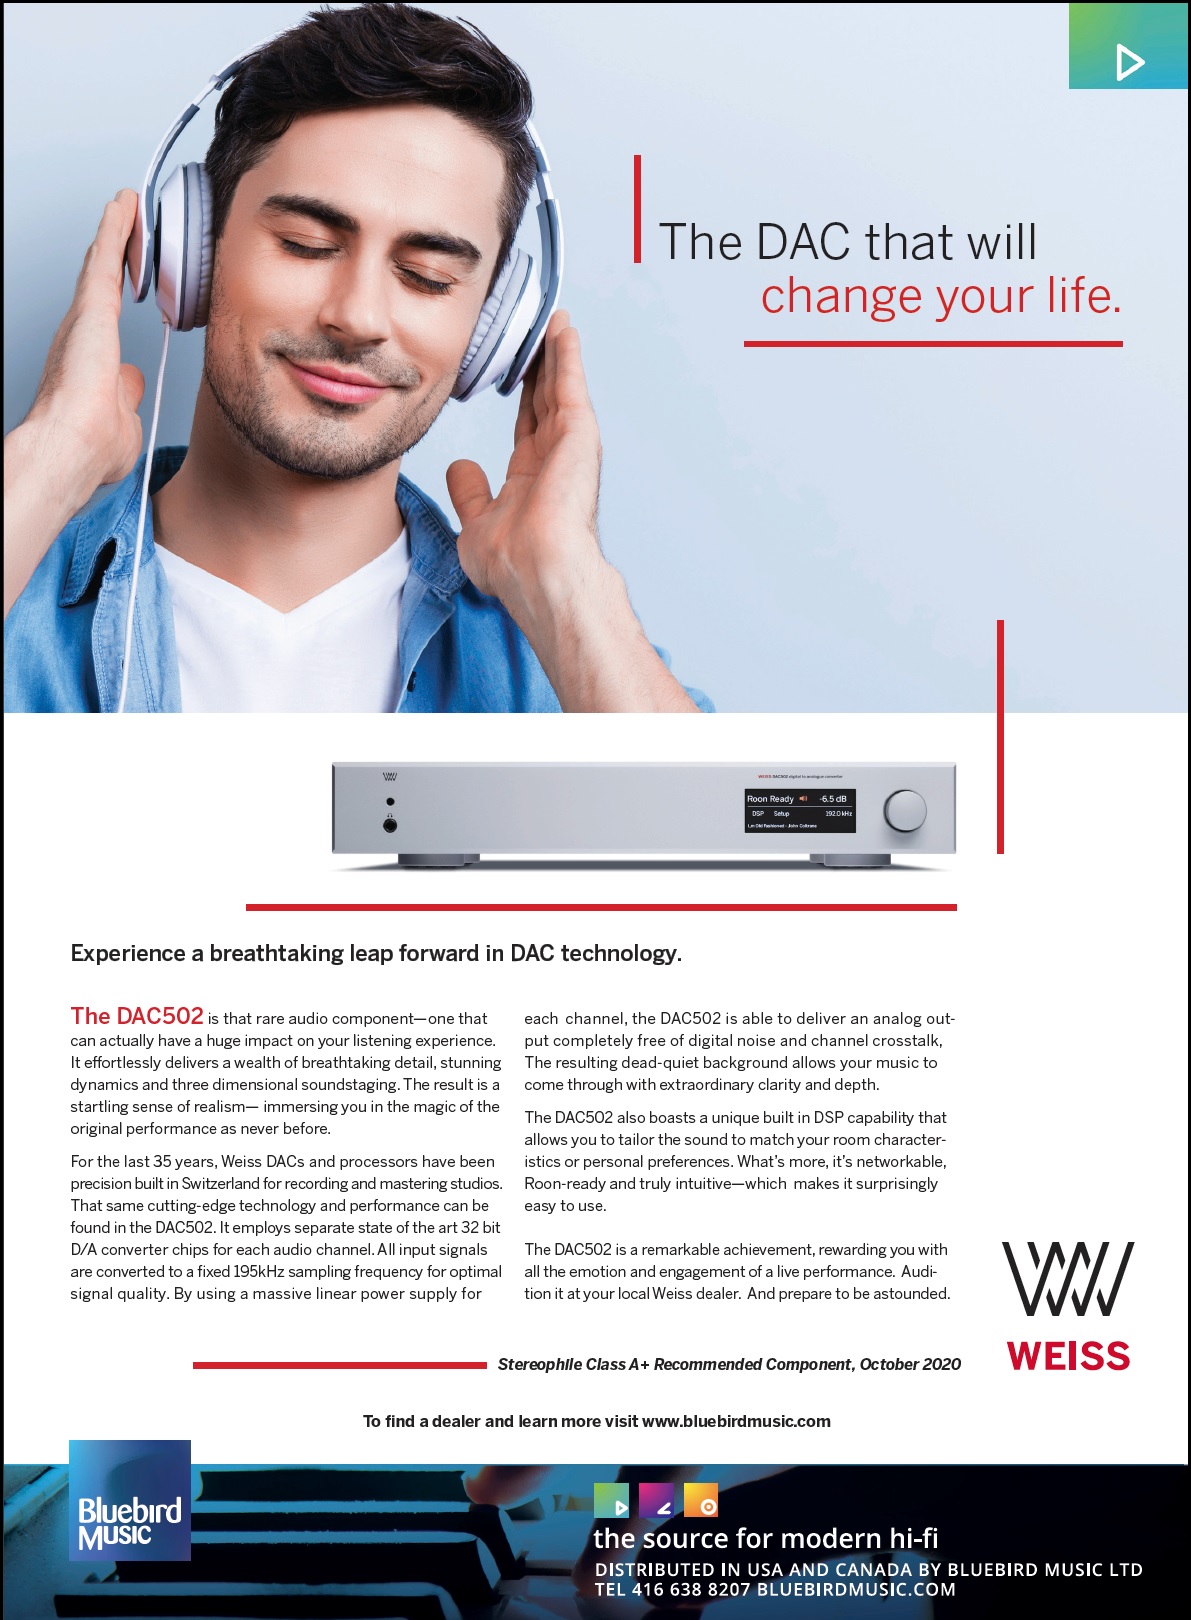 Weiss Stereophile Ad